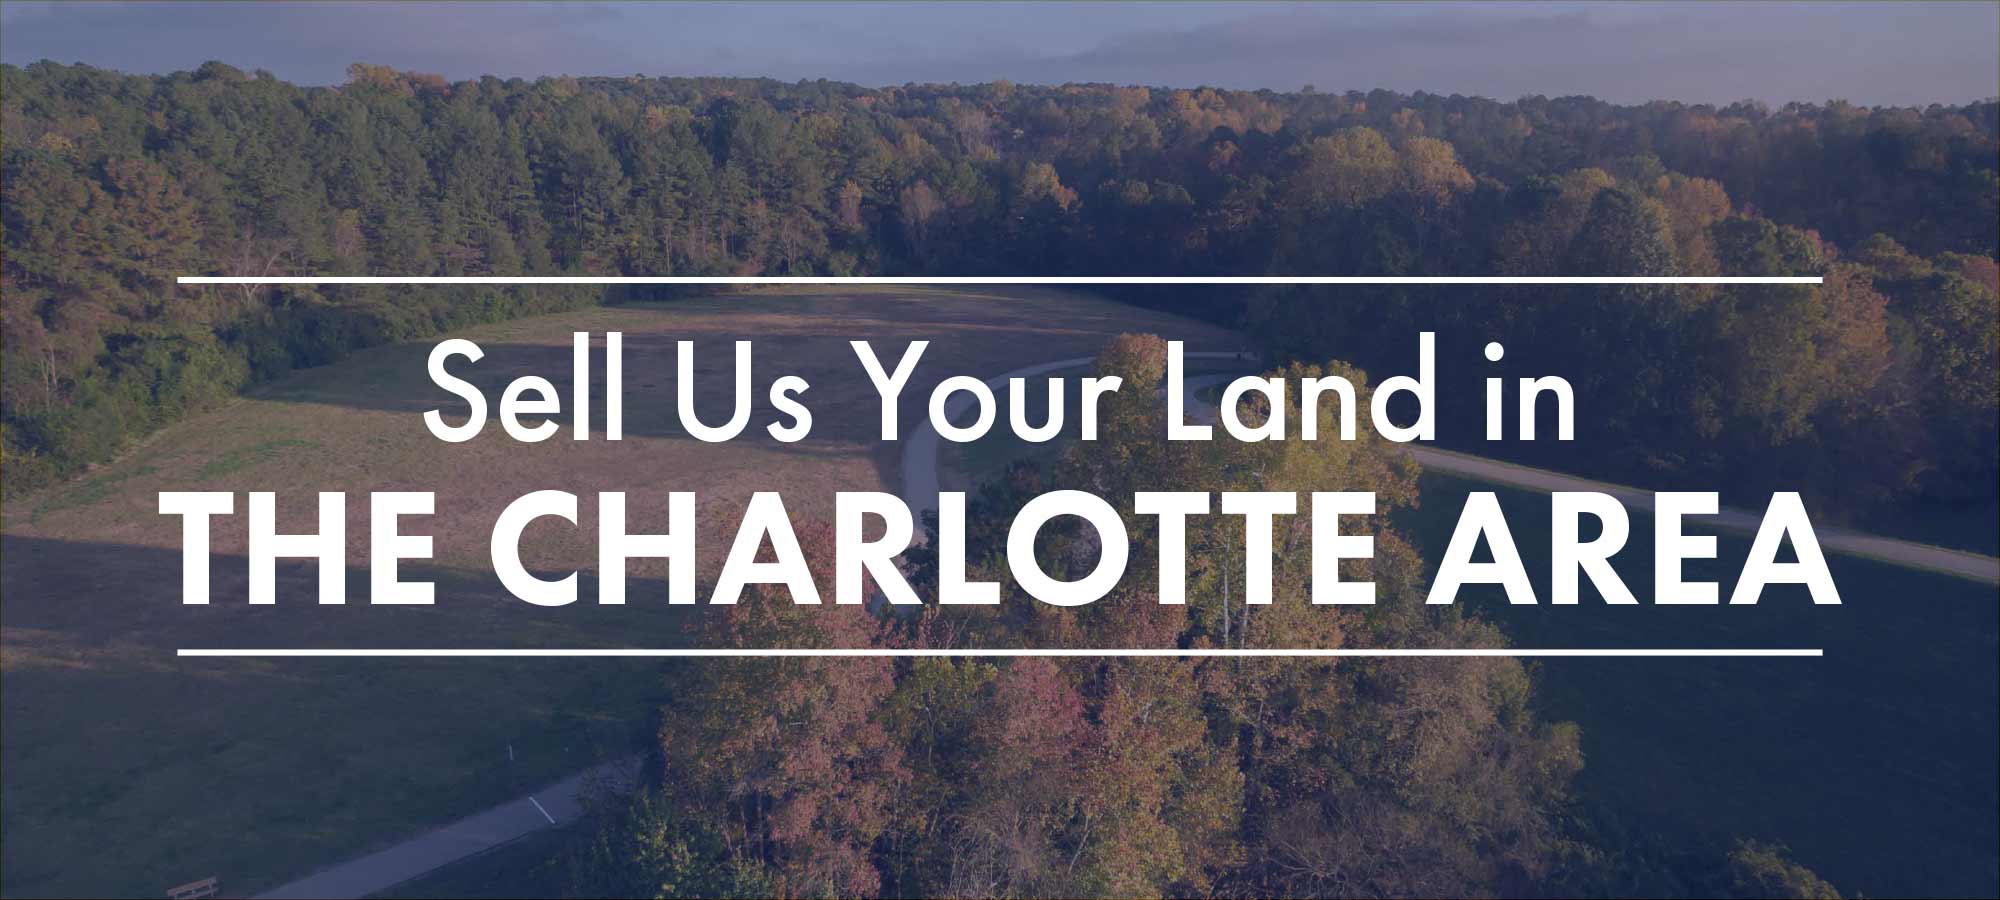 Sell Us Your Land in the Charlotte Area